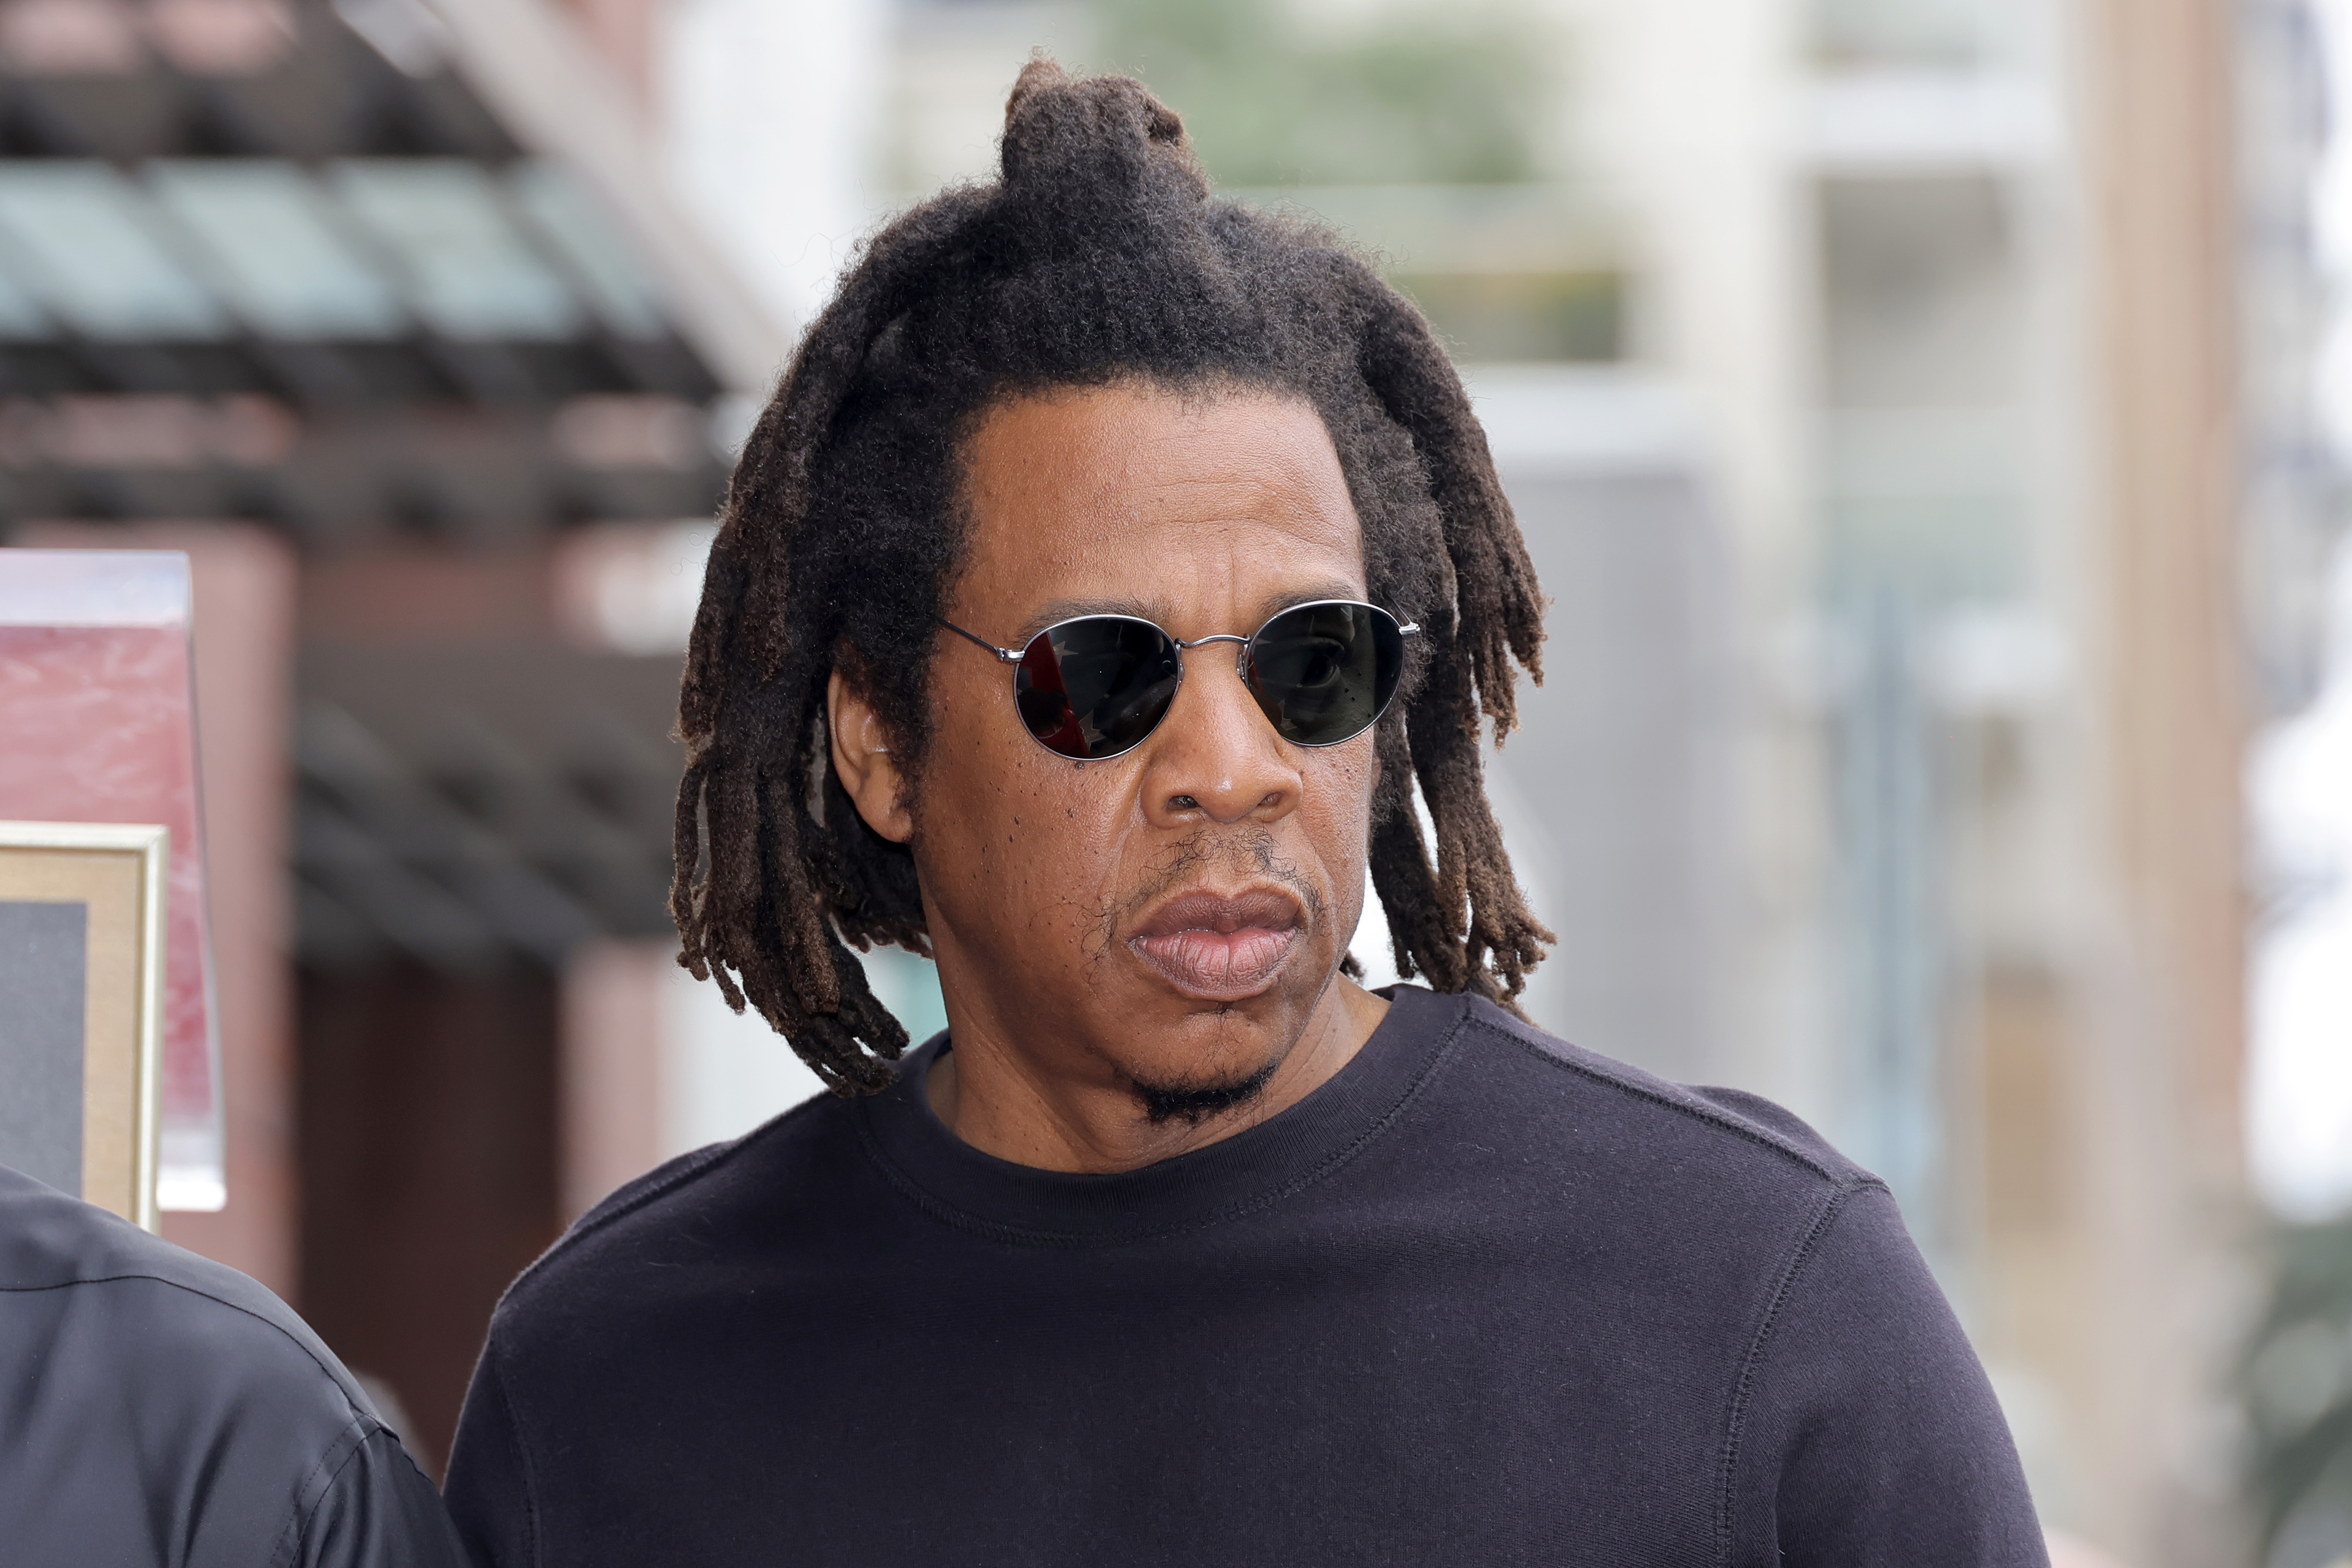 Jay-Z Isn't a Sellout, He's a Capitalist